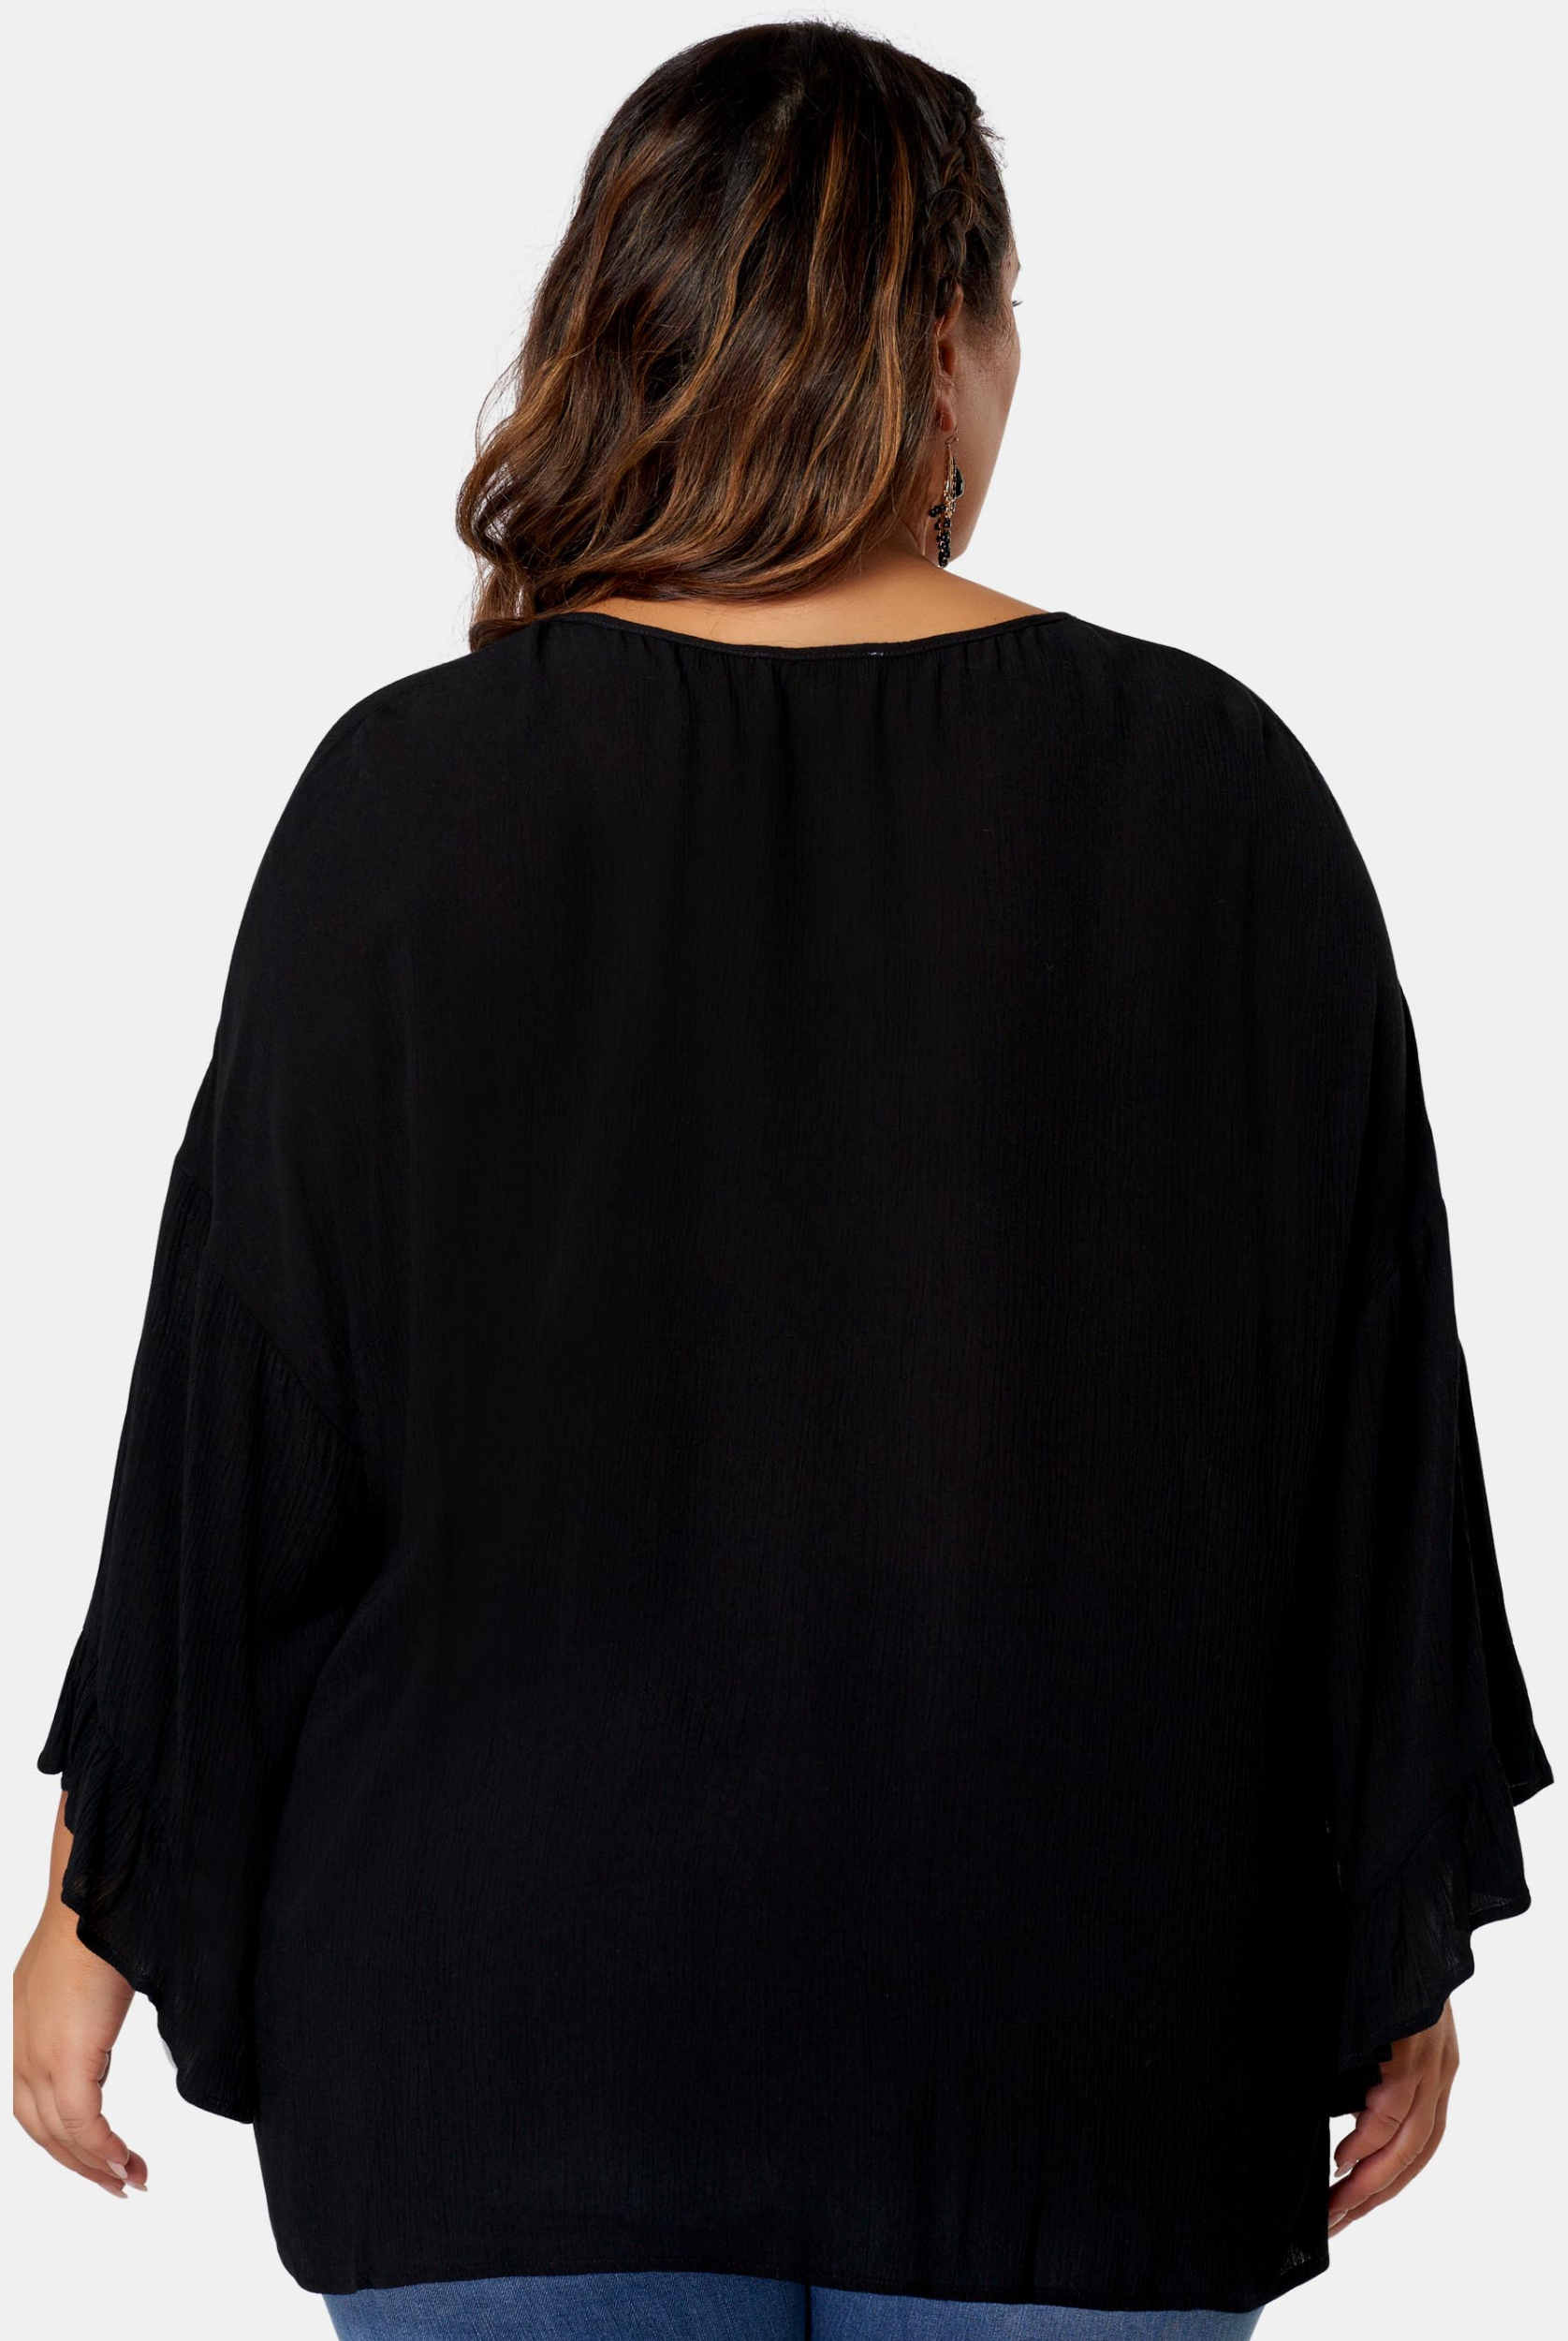 Woman wearing black boho blouse from the back